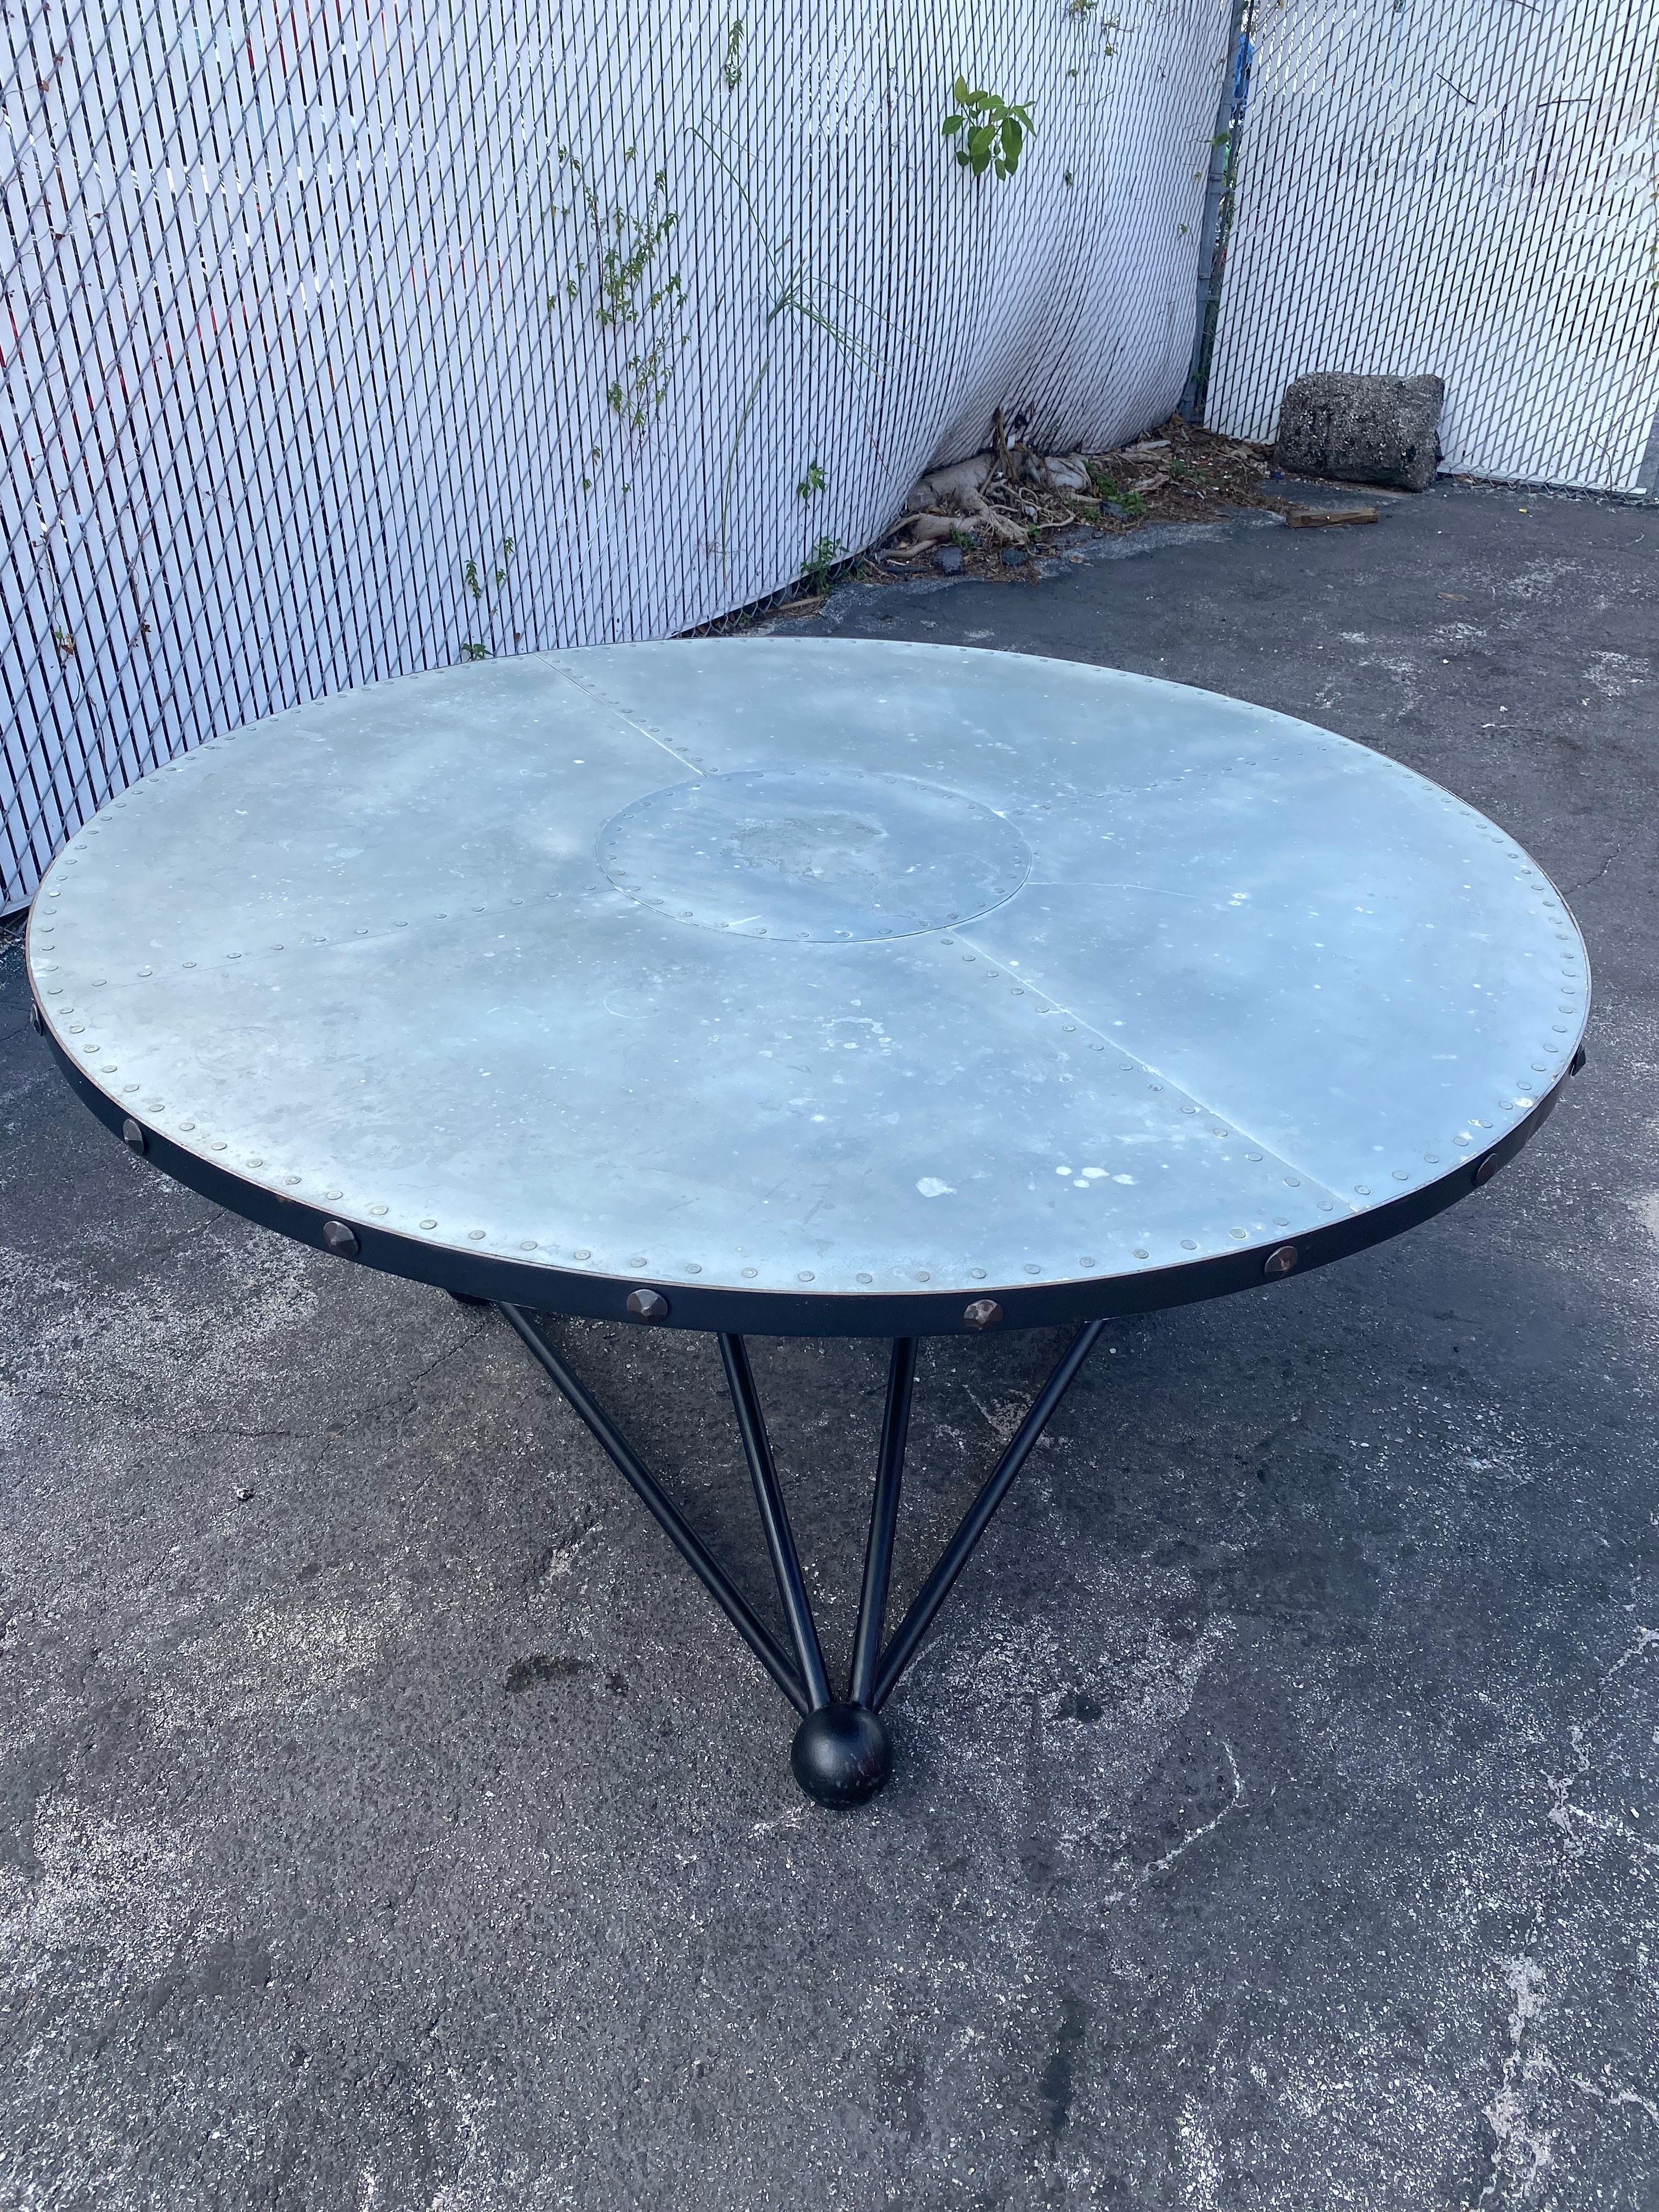 1980s Industrial Geometrical Sculptural Steel Zinc Wood Round Dining Table For Sale 3